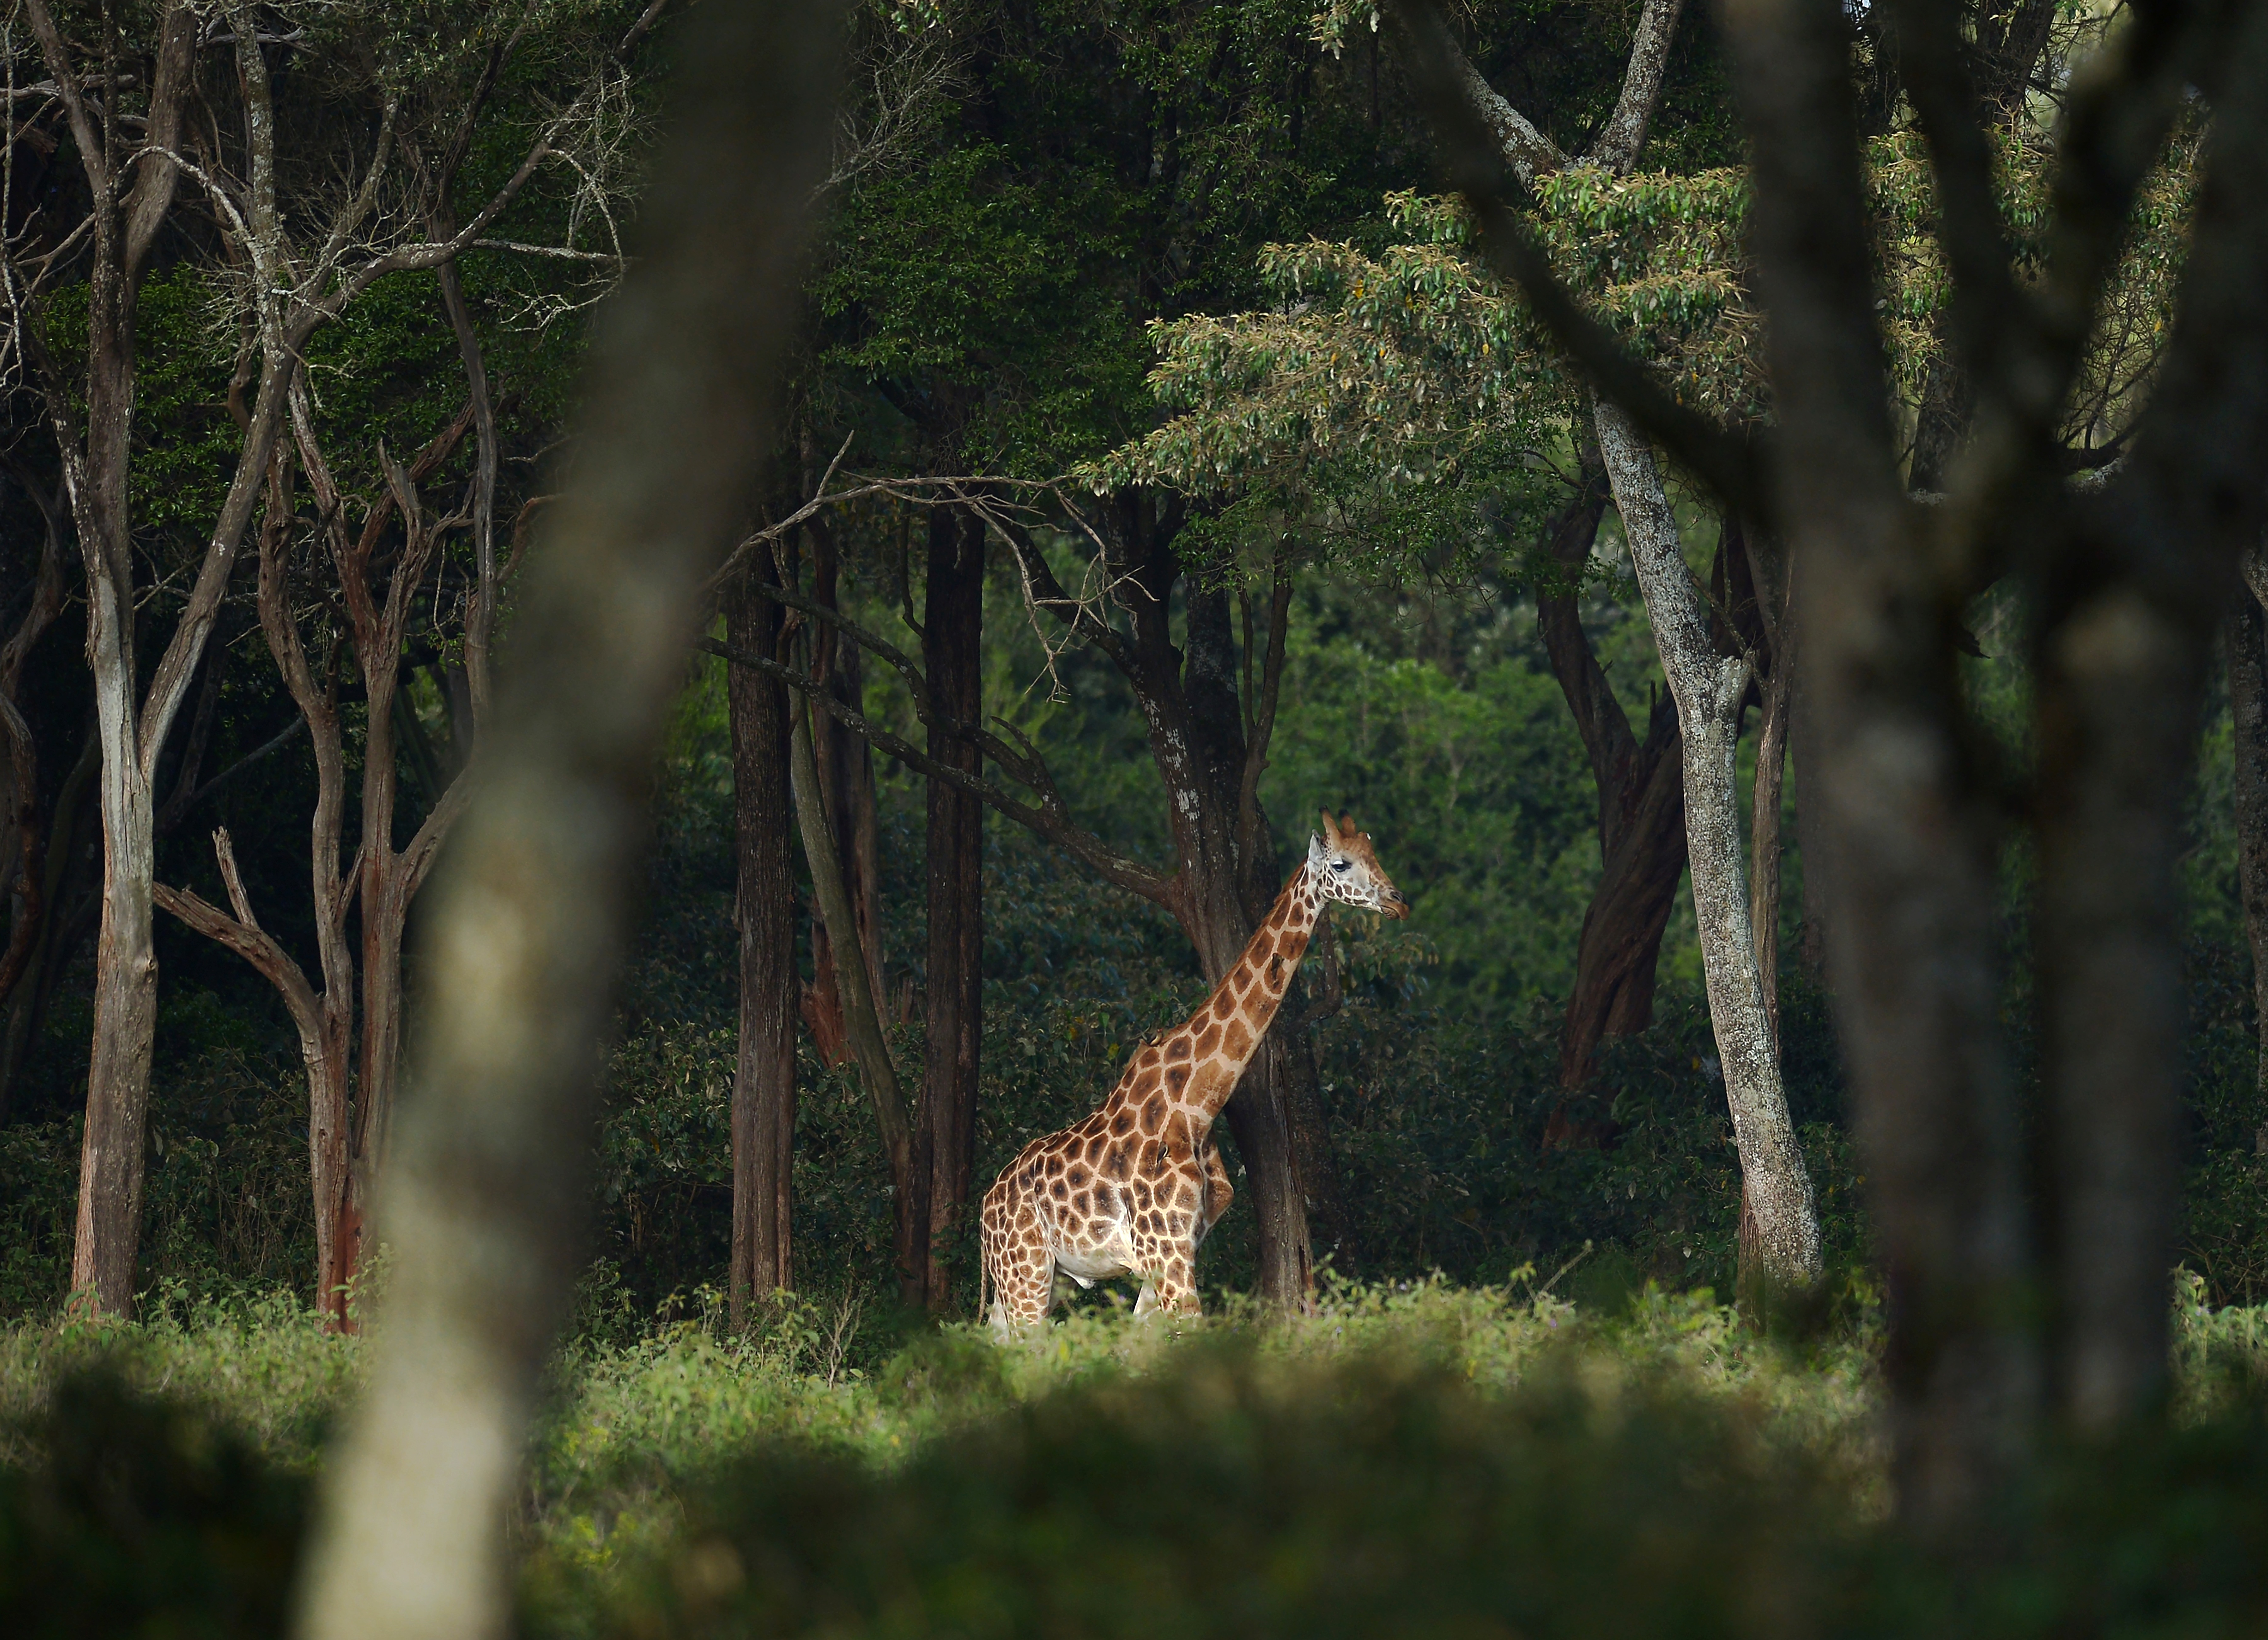 A Rothschild subspecies giraffe stands in its habitat at Nairobi's giraffe conservation centre "The Giraffe Centre" on December 21, 2016.  Long term research into giraffes that only started in 2003 in Namibia revealed that giraffes have silently being going extinct, with numbers plummeting by 40 percent in the last three decades to about 97,500, the International Union for the Conservation of Nature (IUCN) reported this month. One of the sub-species is the Nubian giraffe whose populations in Ethiopia and South Sudan are estimated to have dropped from over 20,000 to just 650.  / AFP PHOTO / TONY KARUMBA